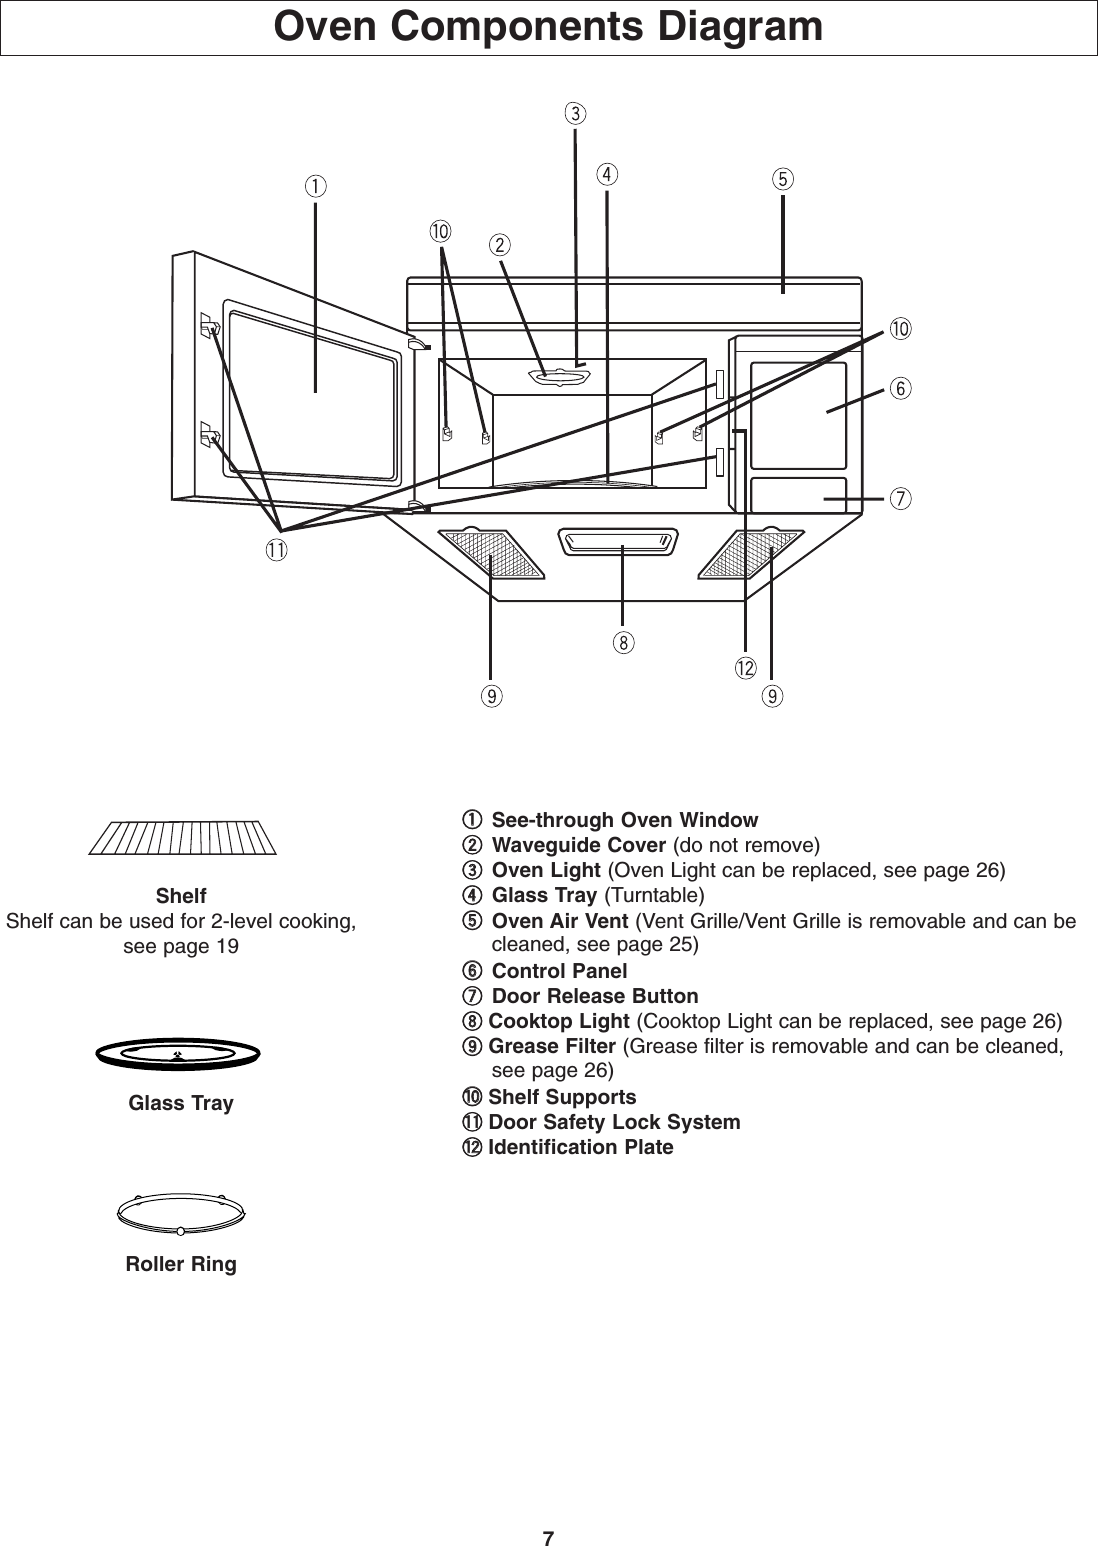 7Oven Components Diagram11See-through Oven Window22Waveguide Cover (do not remove)33Oven Light (Oven Light can be replaced, see page 26)44Glass Tray (Turntable)55Oven Air Vent (Vent Grille/Vent Grille is removable and can be cleaned, see page 25)66Control Panel 77Door Release Button88Cooktop Light (Cooktop Light can be replaced, see page 26)99Grease Filter (Grease filter is removable and can be cleaned, see page 26)00Shelf Supports--Door Safety Lock System==Identification PlateShelfShelf can be used for 2-level cooking,see page 19Glass TrayRoller Ring